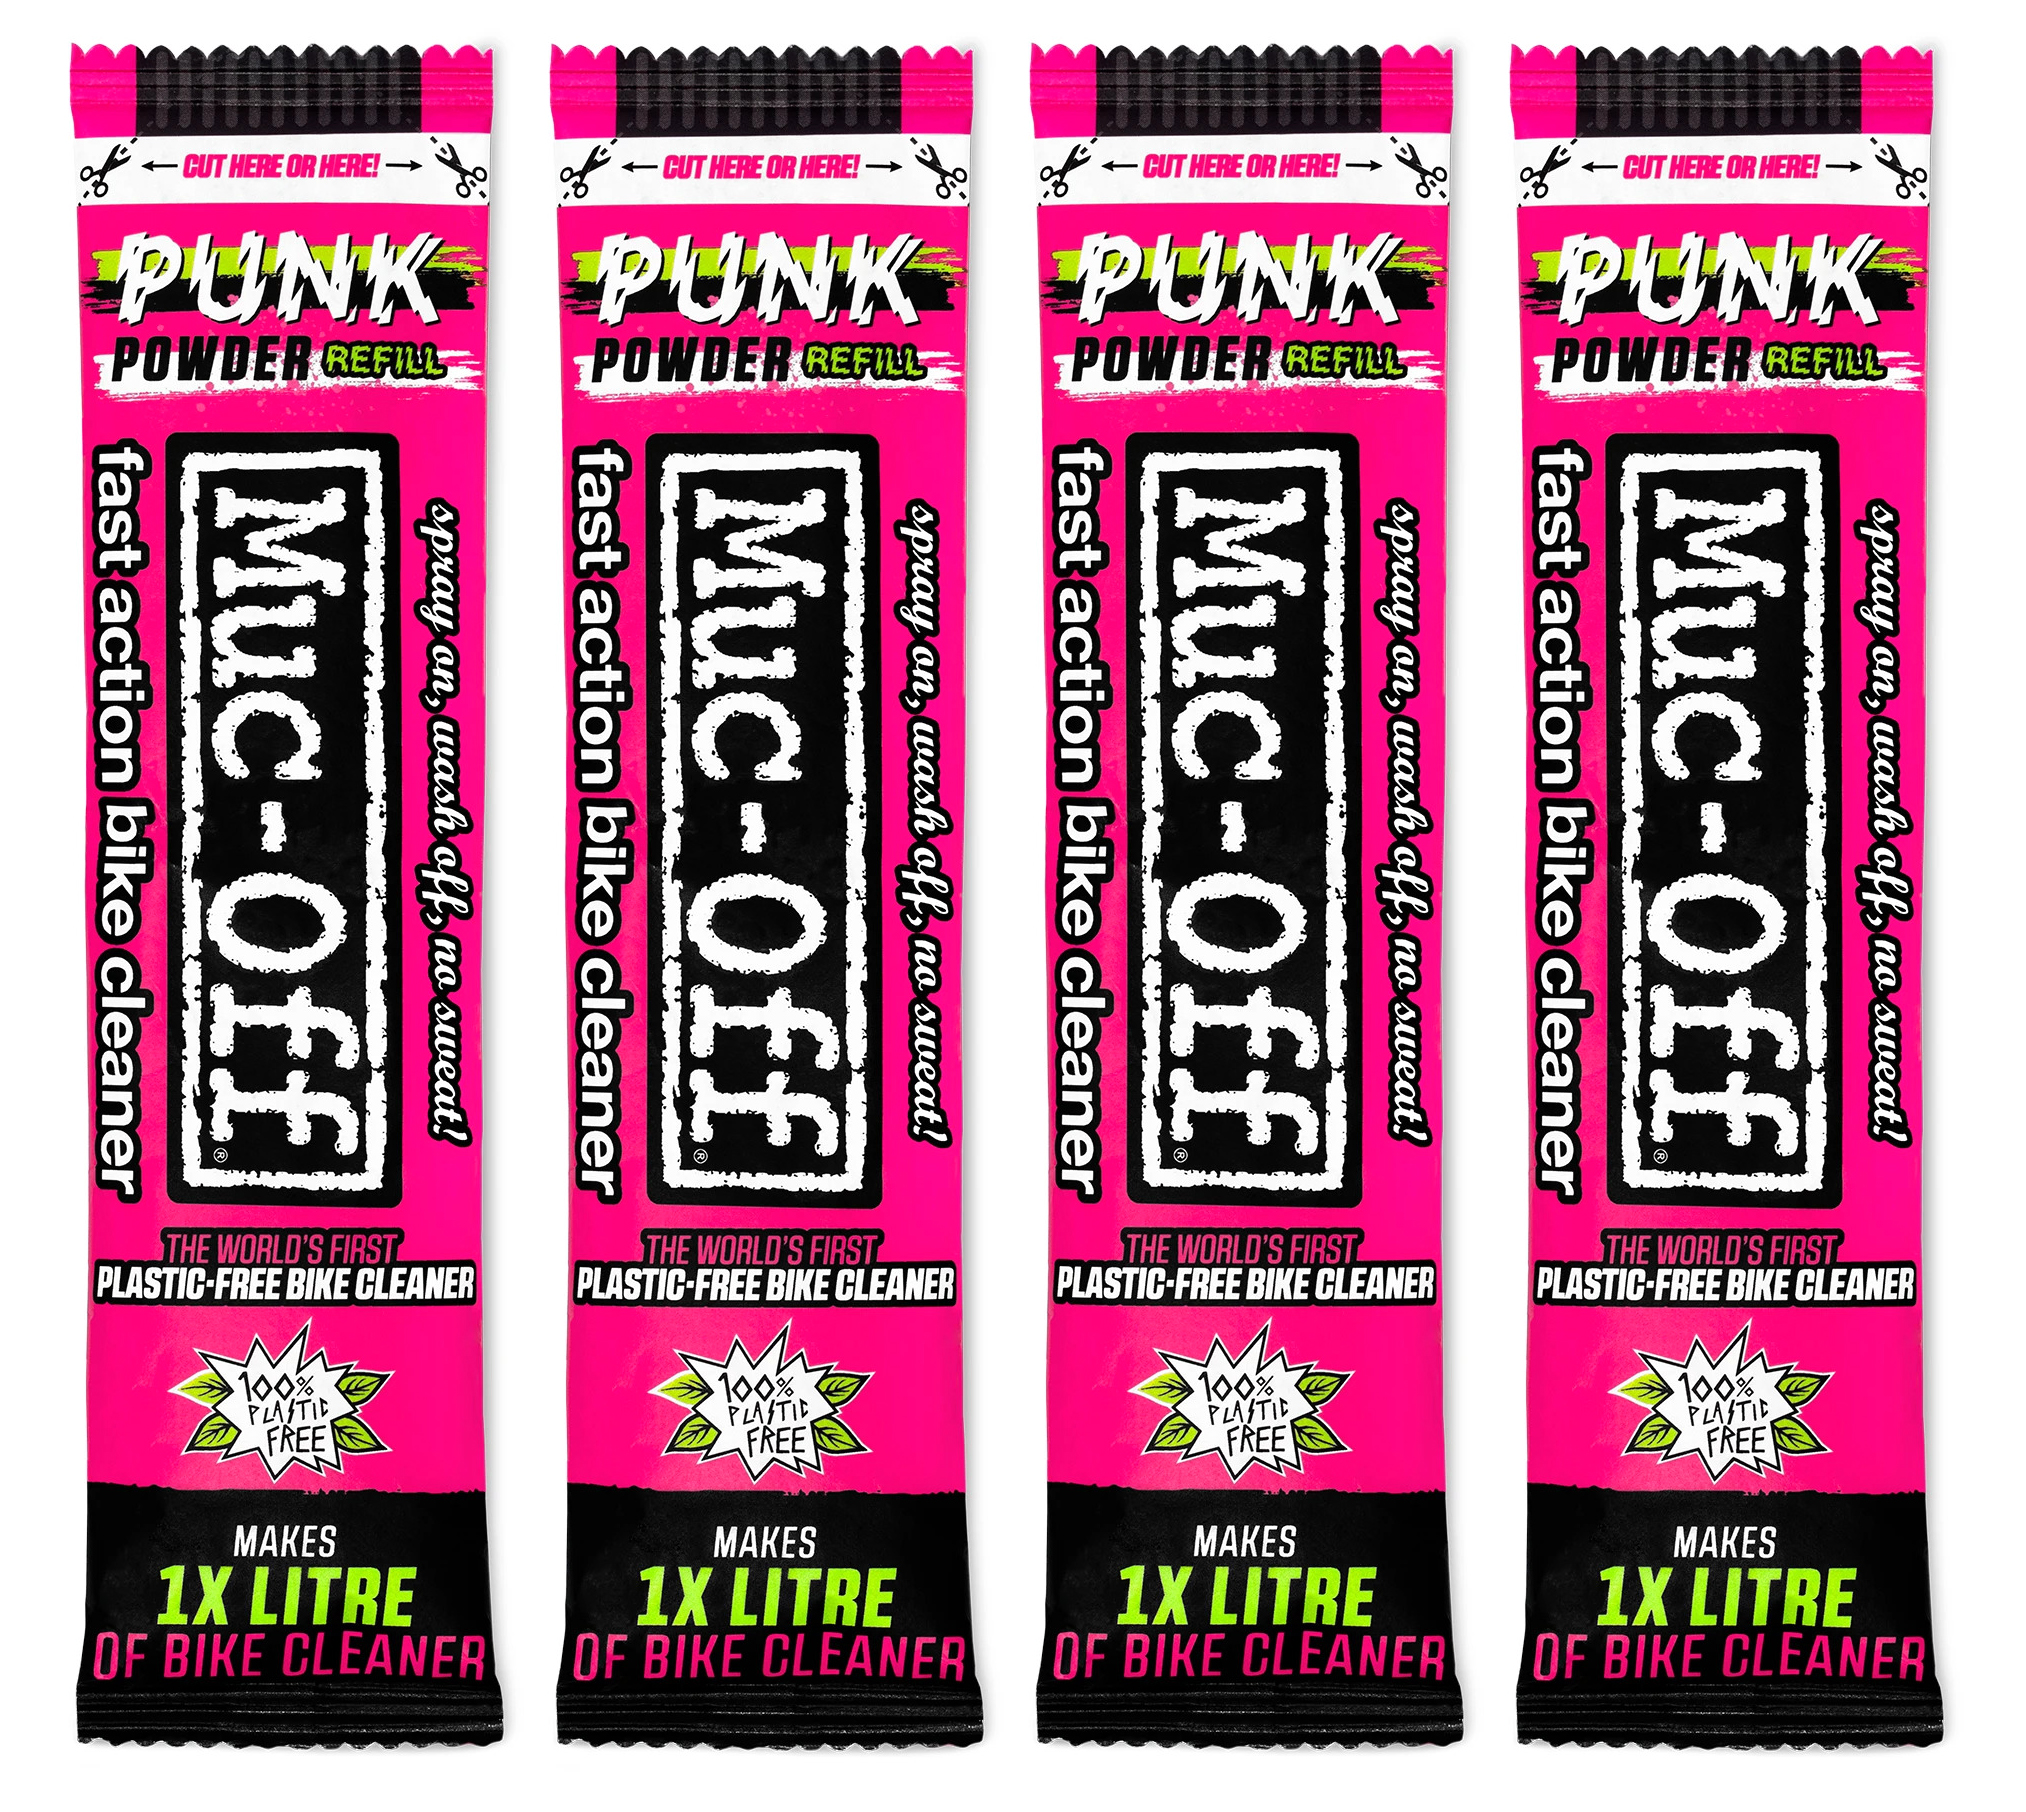 MUC-OFF Punk Powder Motorcycle Cleaner refill 4 pack - Shampoo and